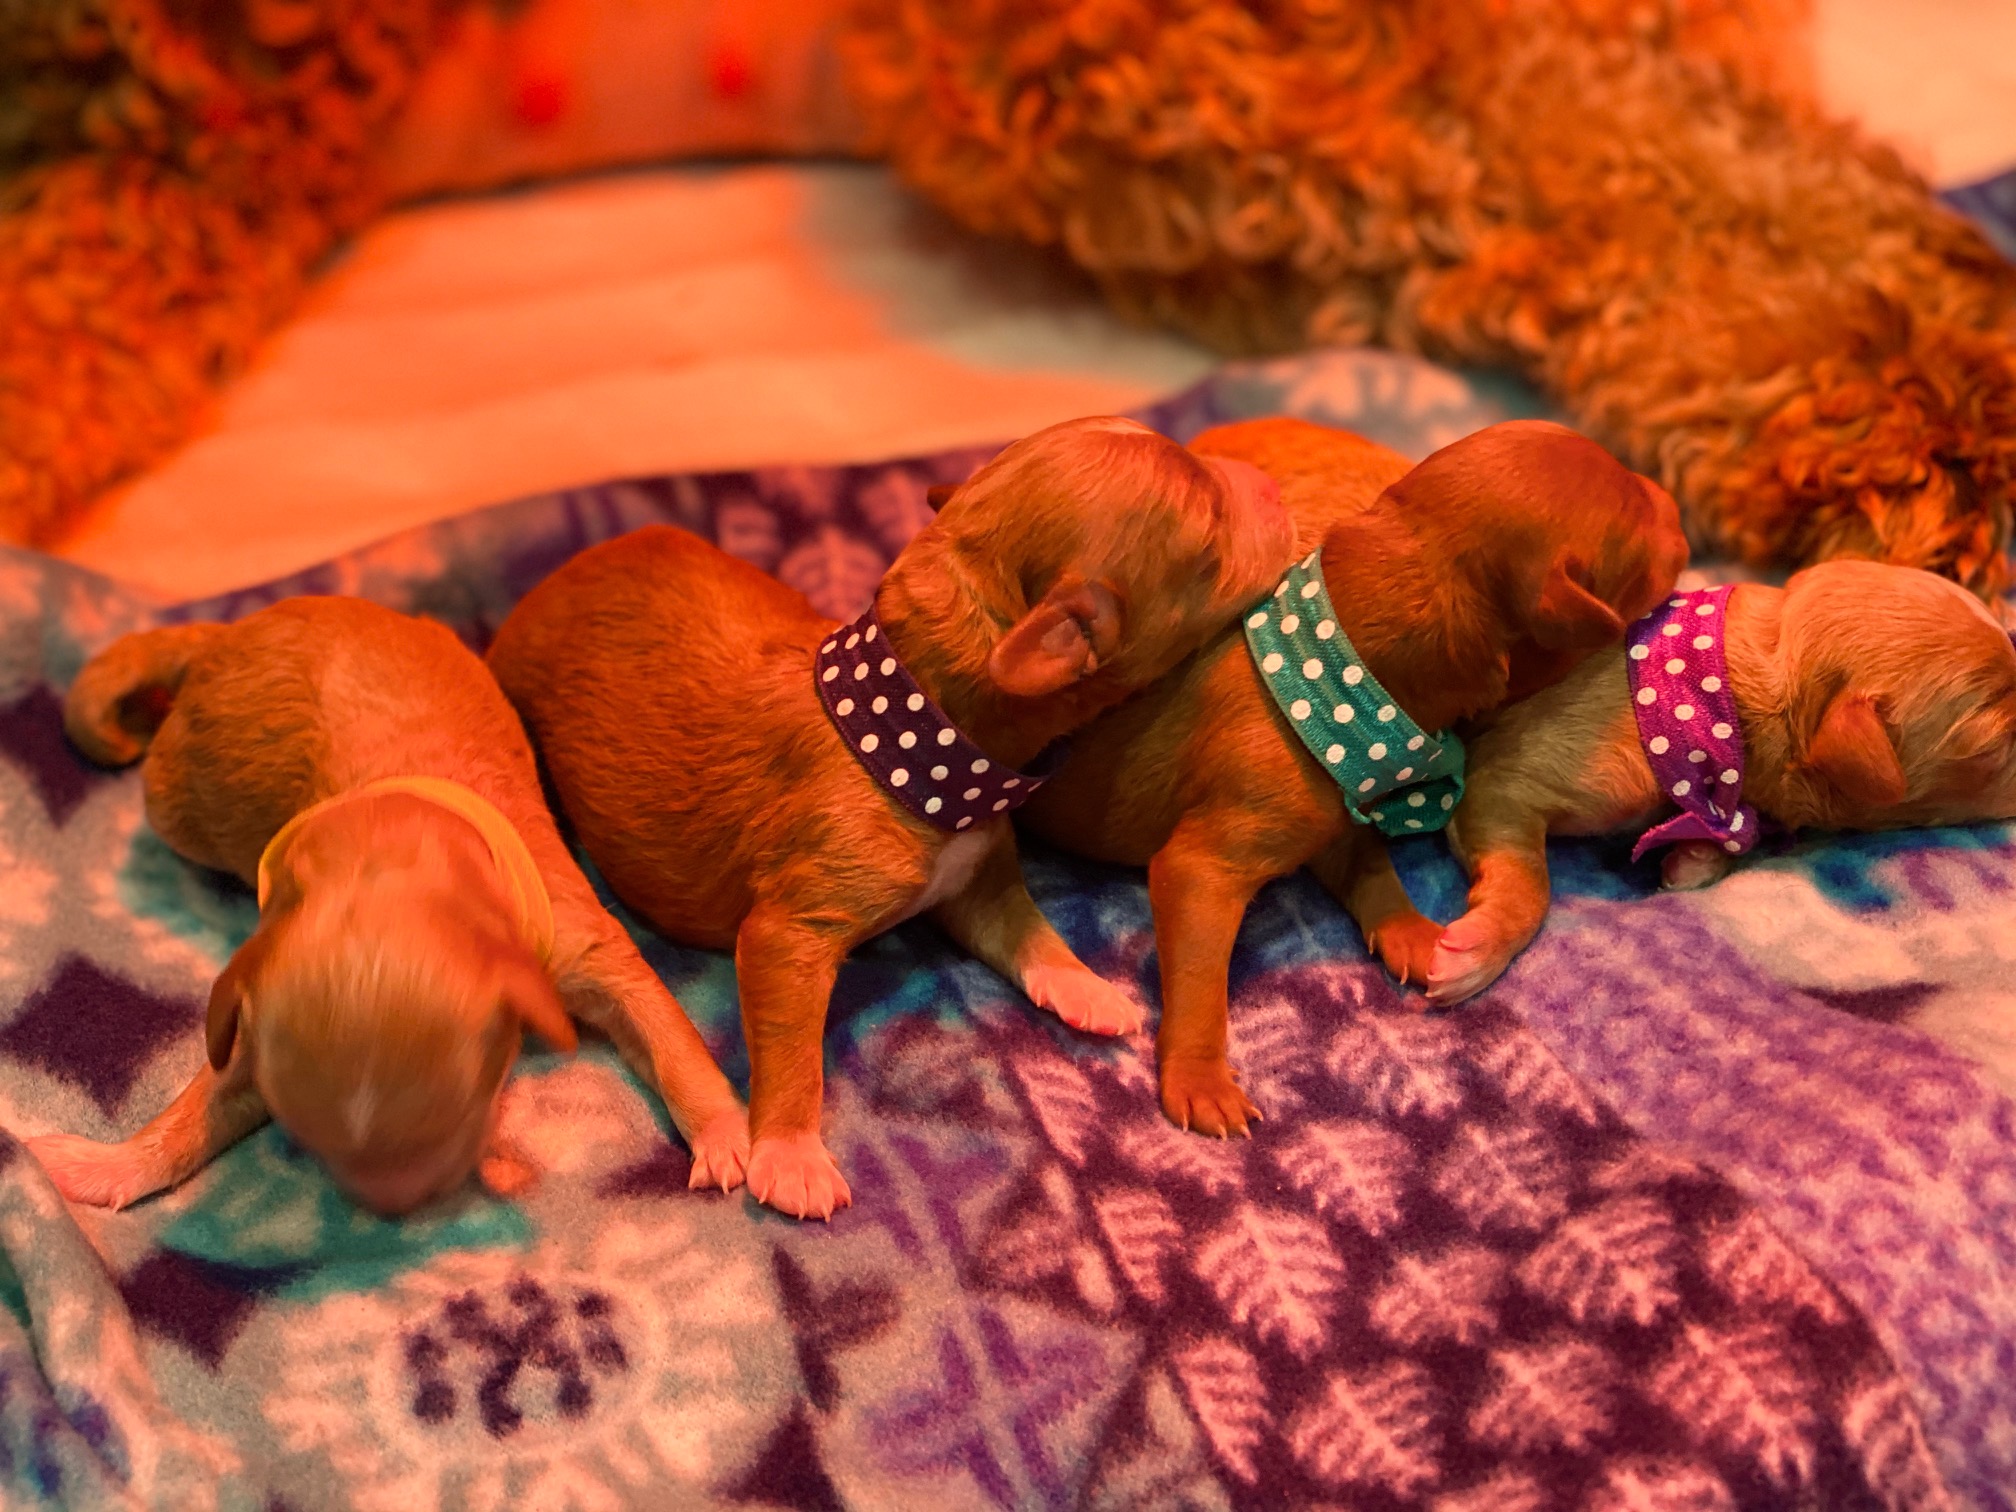 Four adorable puppies peacefully resting on a soft blanket